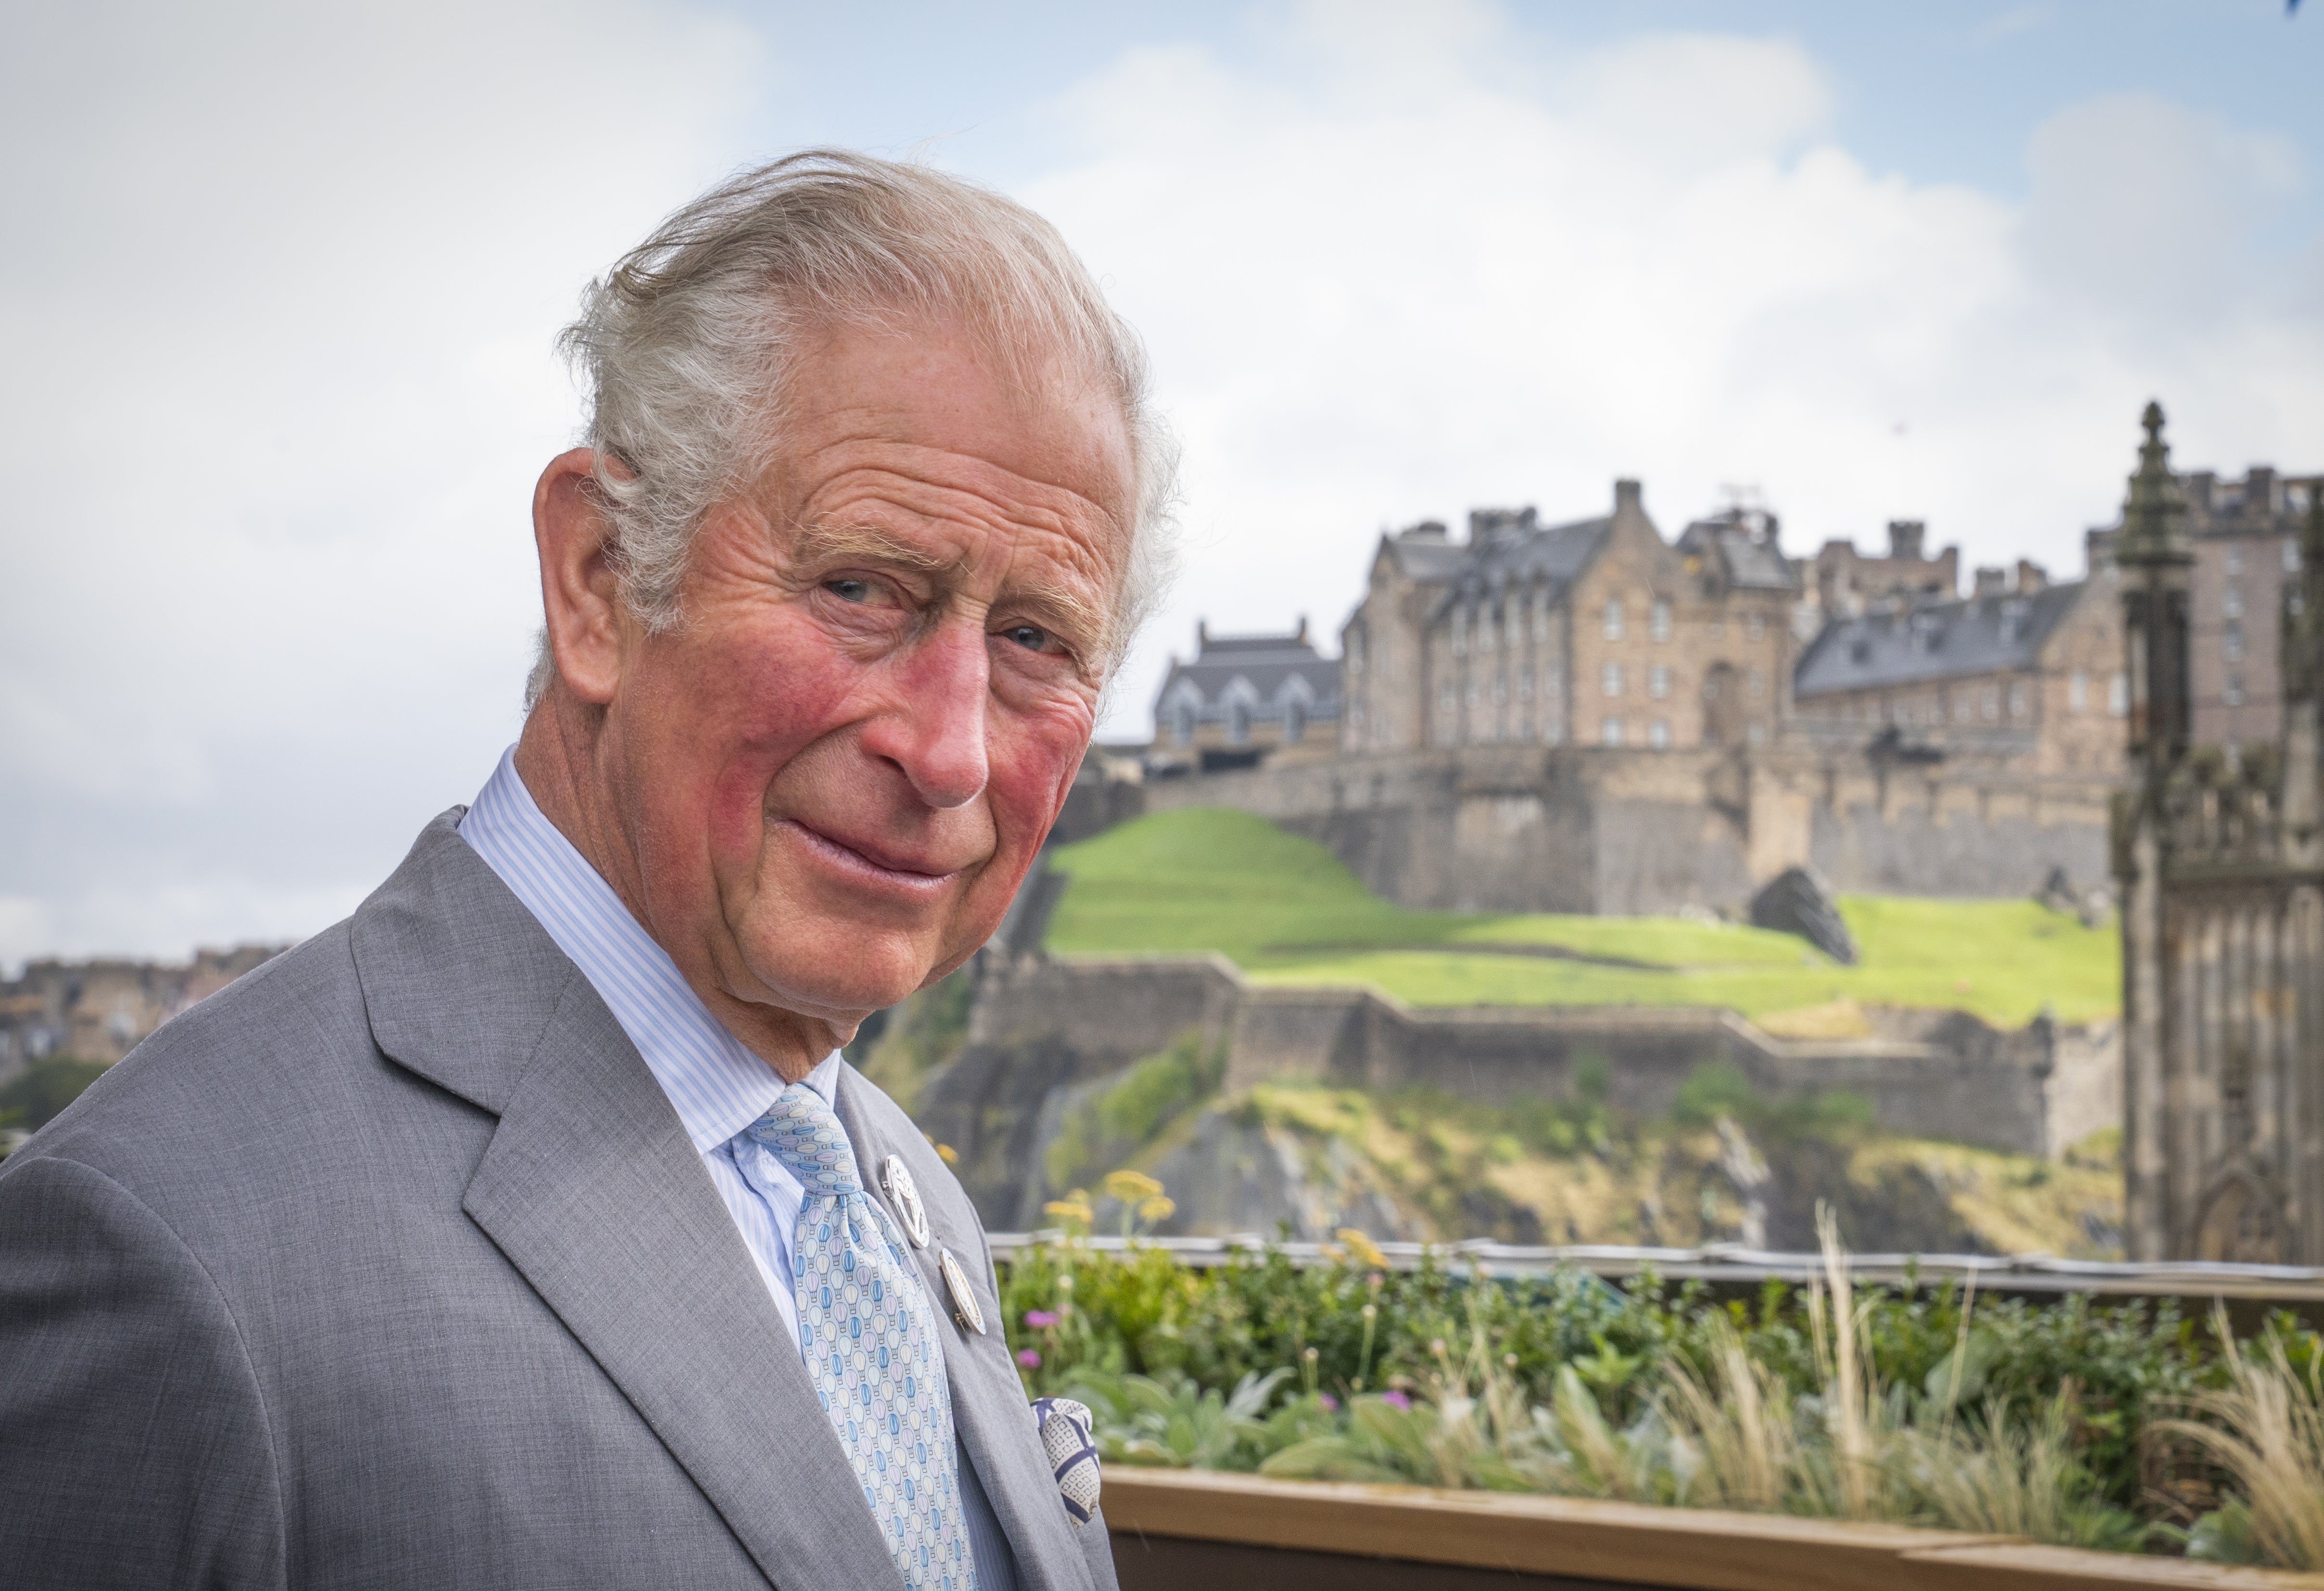 Prince Charles allegedly had a private meeting with Bakr bin Laden in October 2013